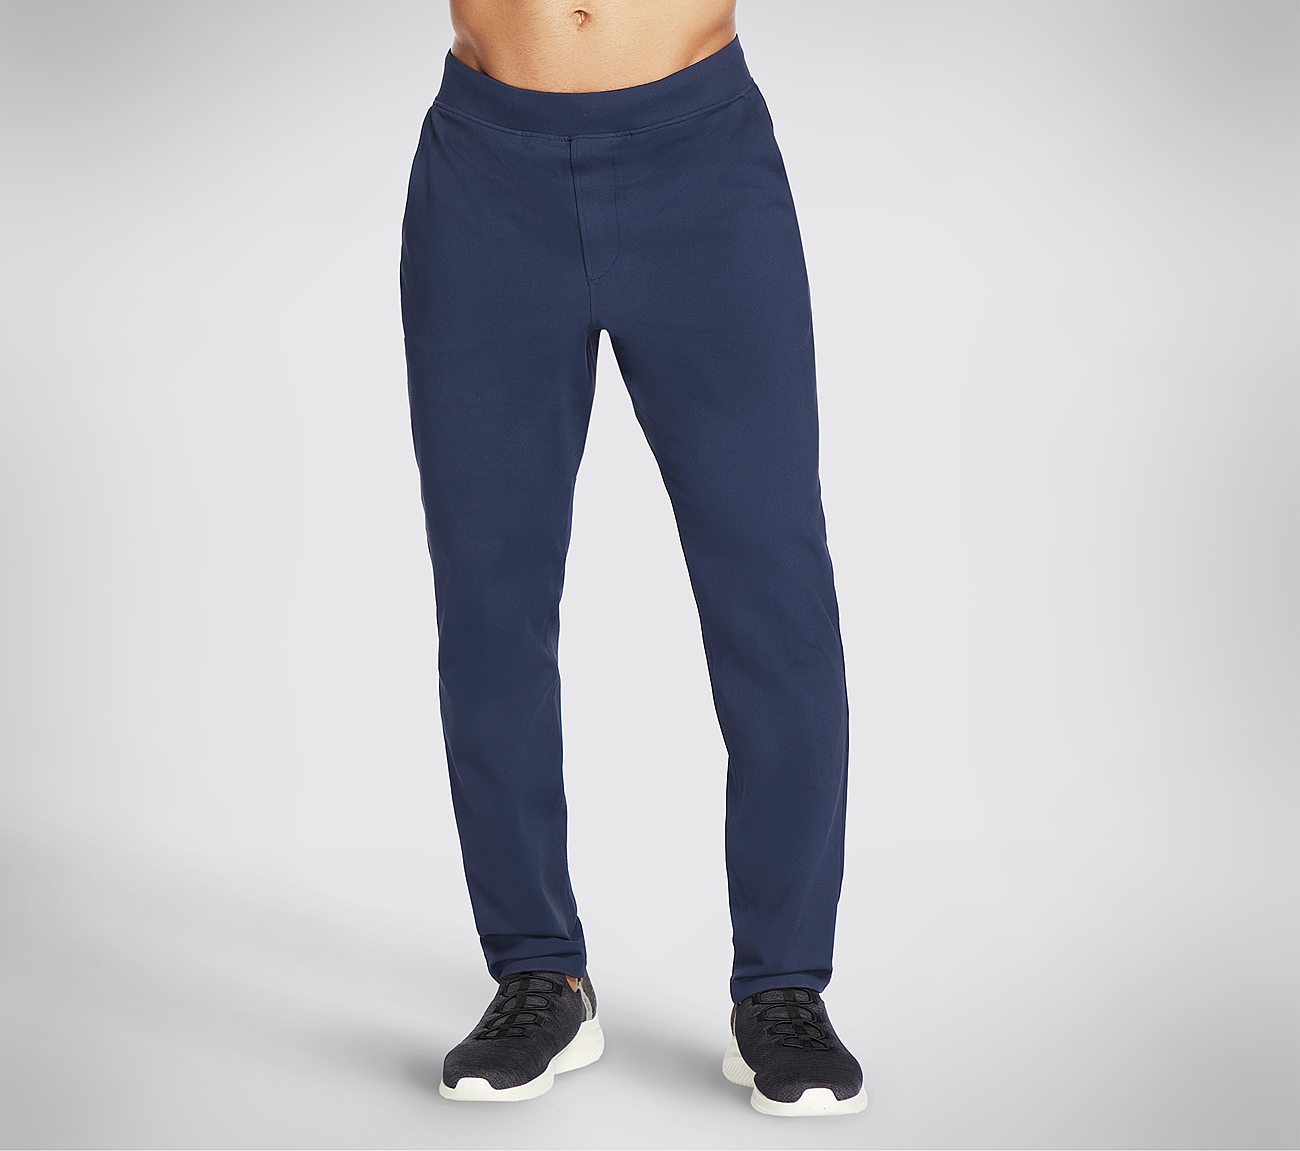 THE GOWALK PANT CONTROLLER, NNNAVY Apparel Lateral View